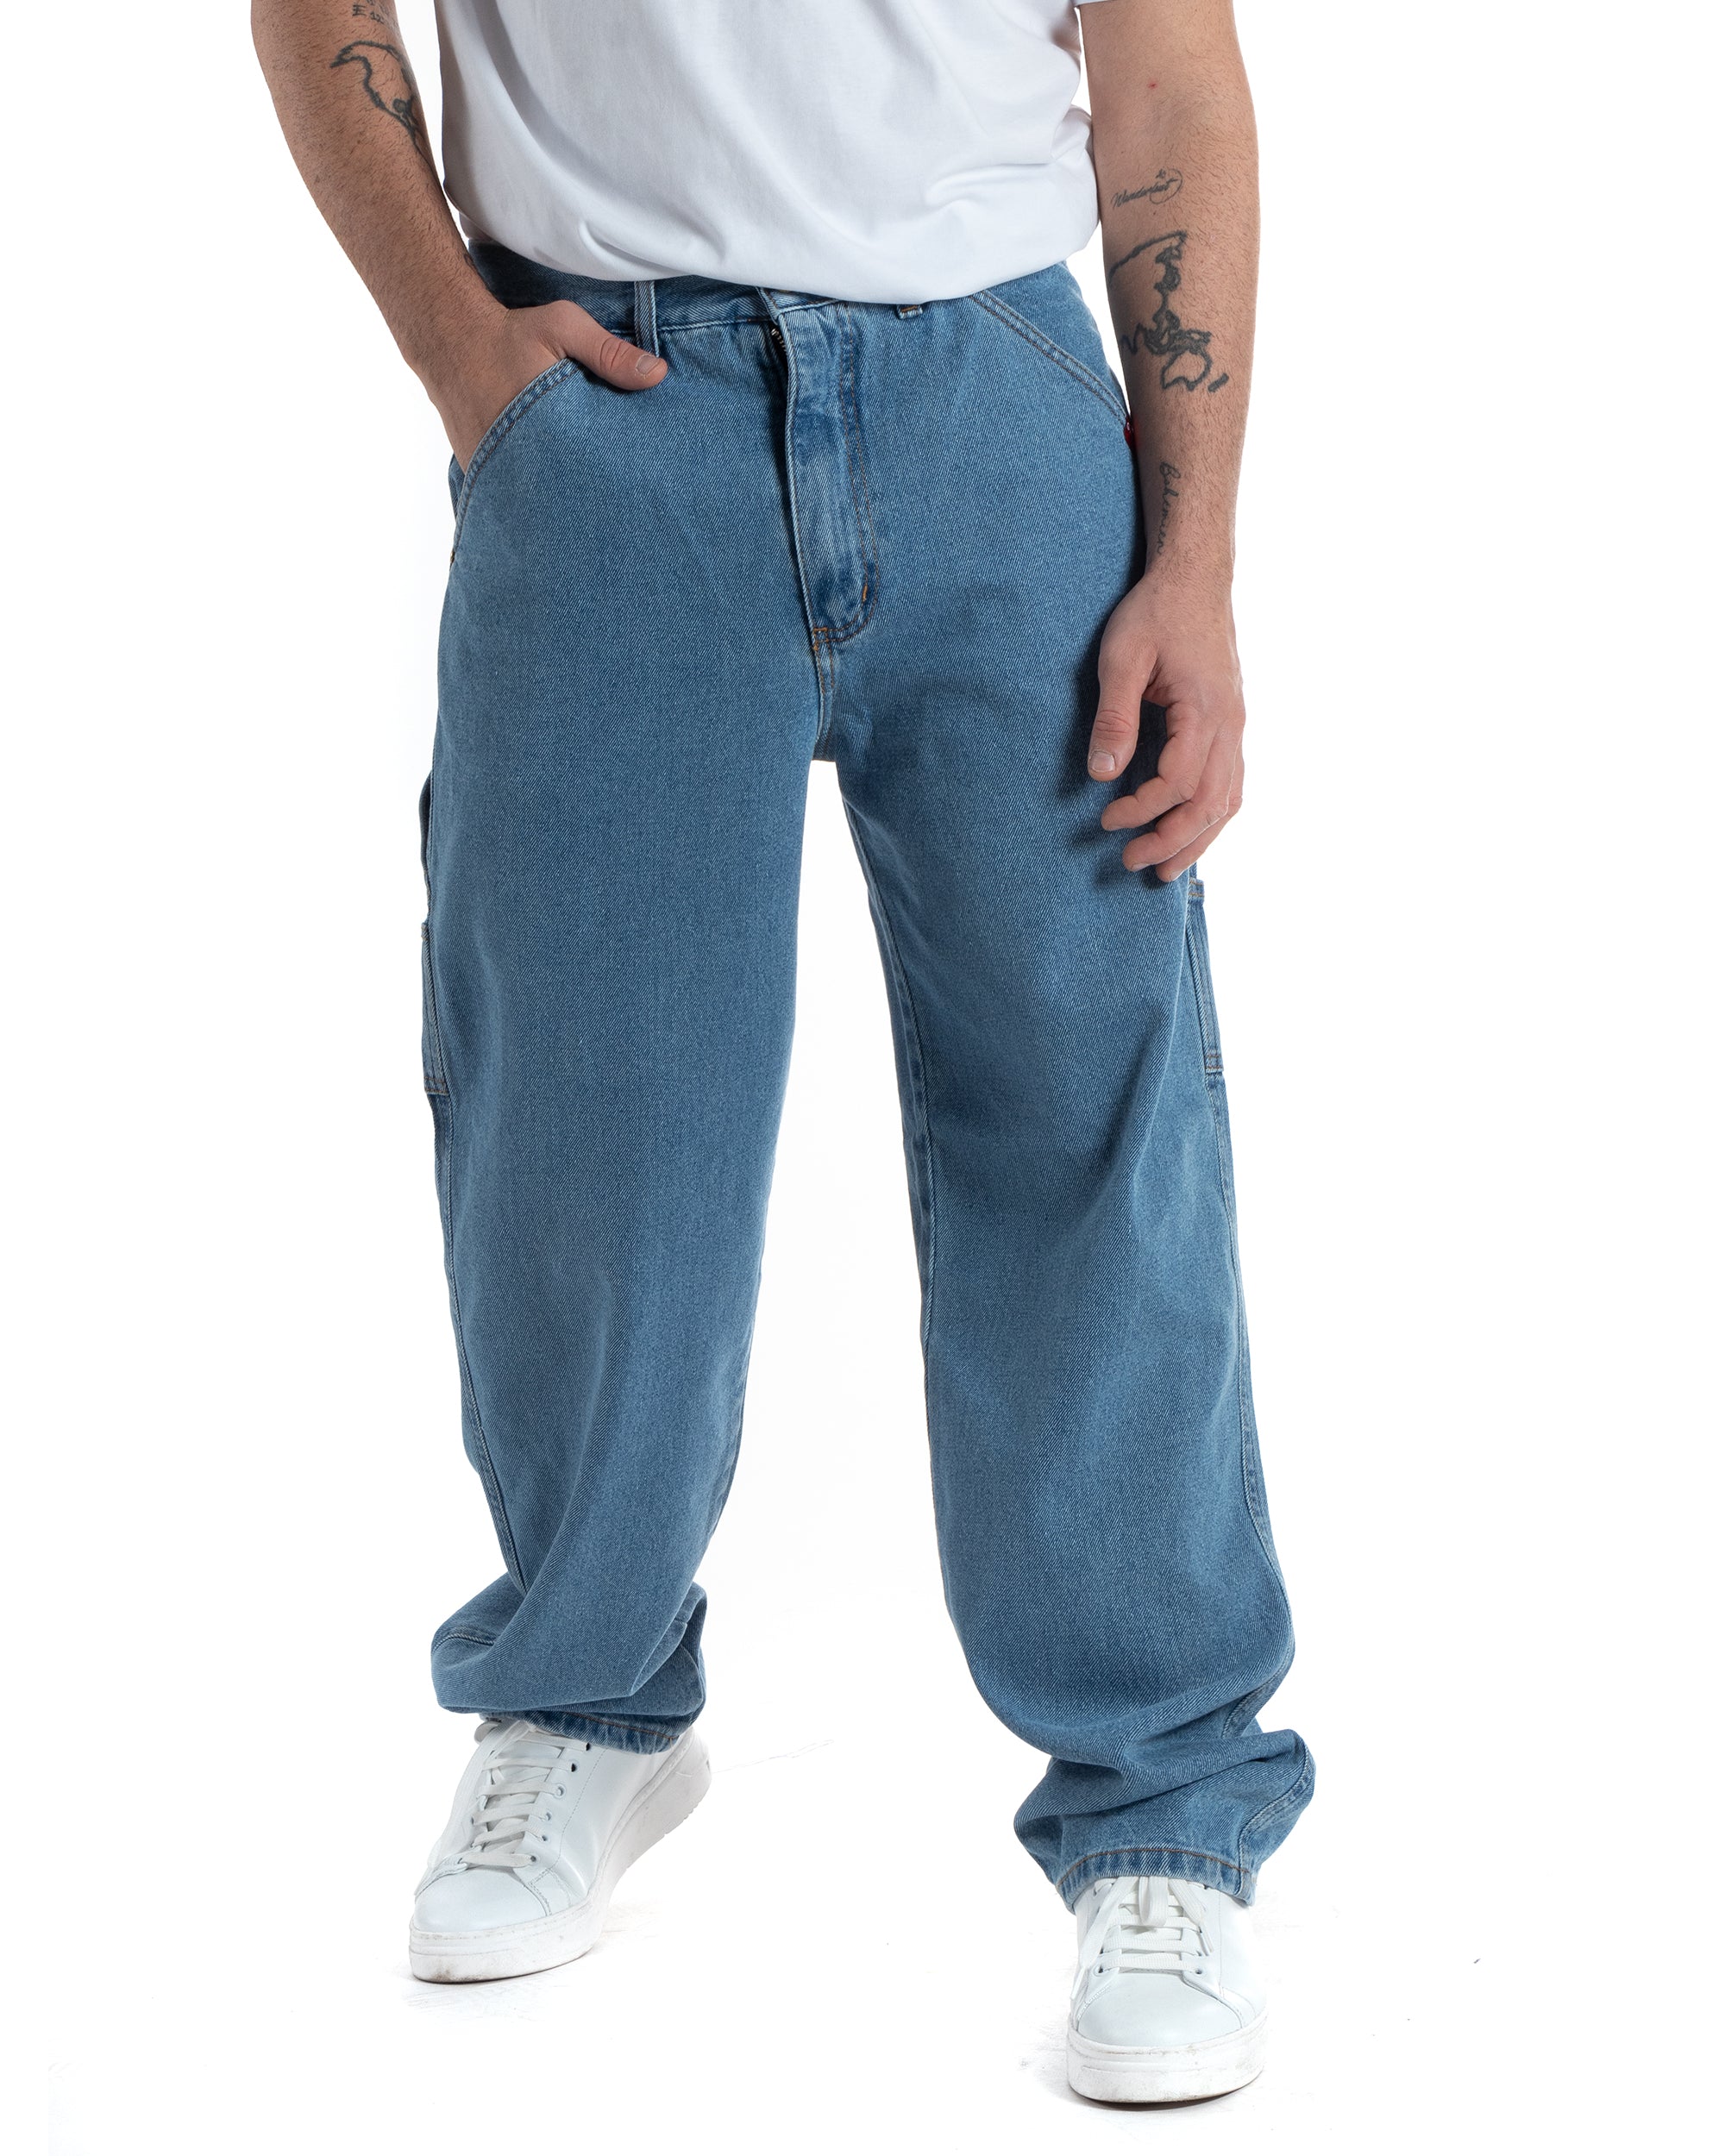 Men's Straight Fit Carpenter Dark Denim Jeans Trousers with Side Pockets GIOSAL-P5925A